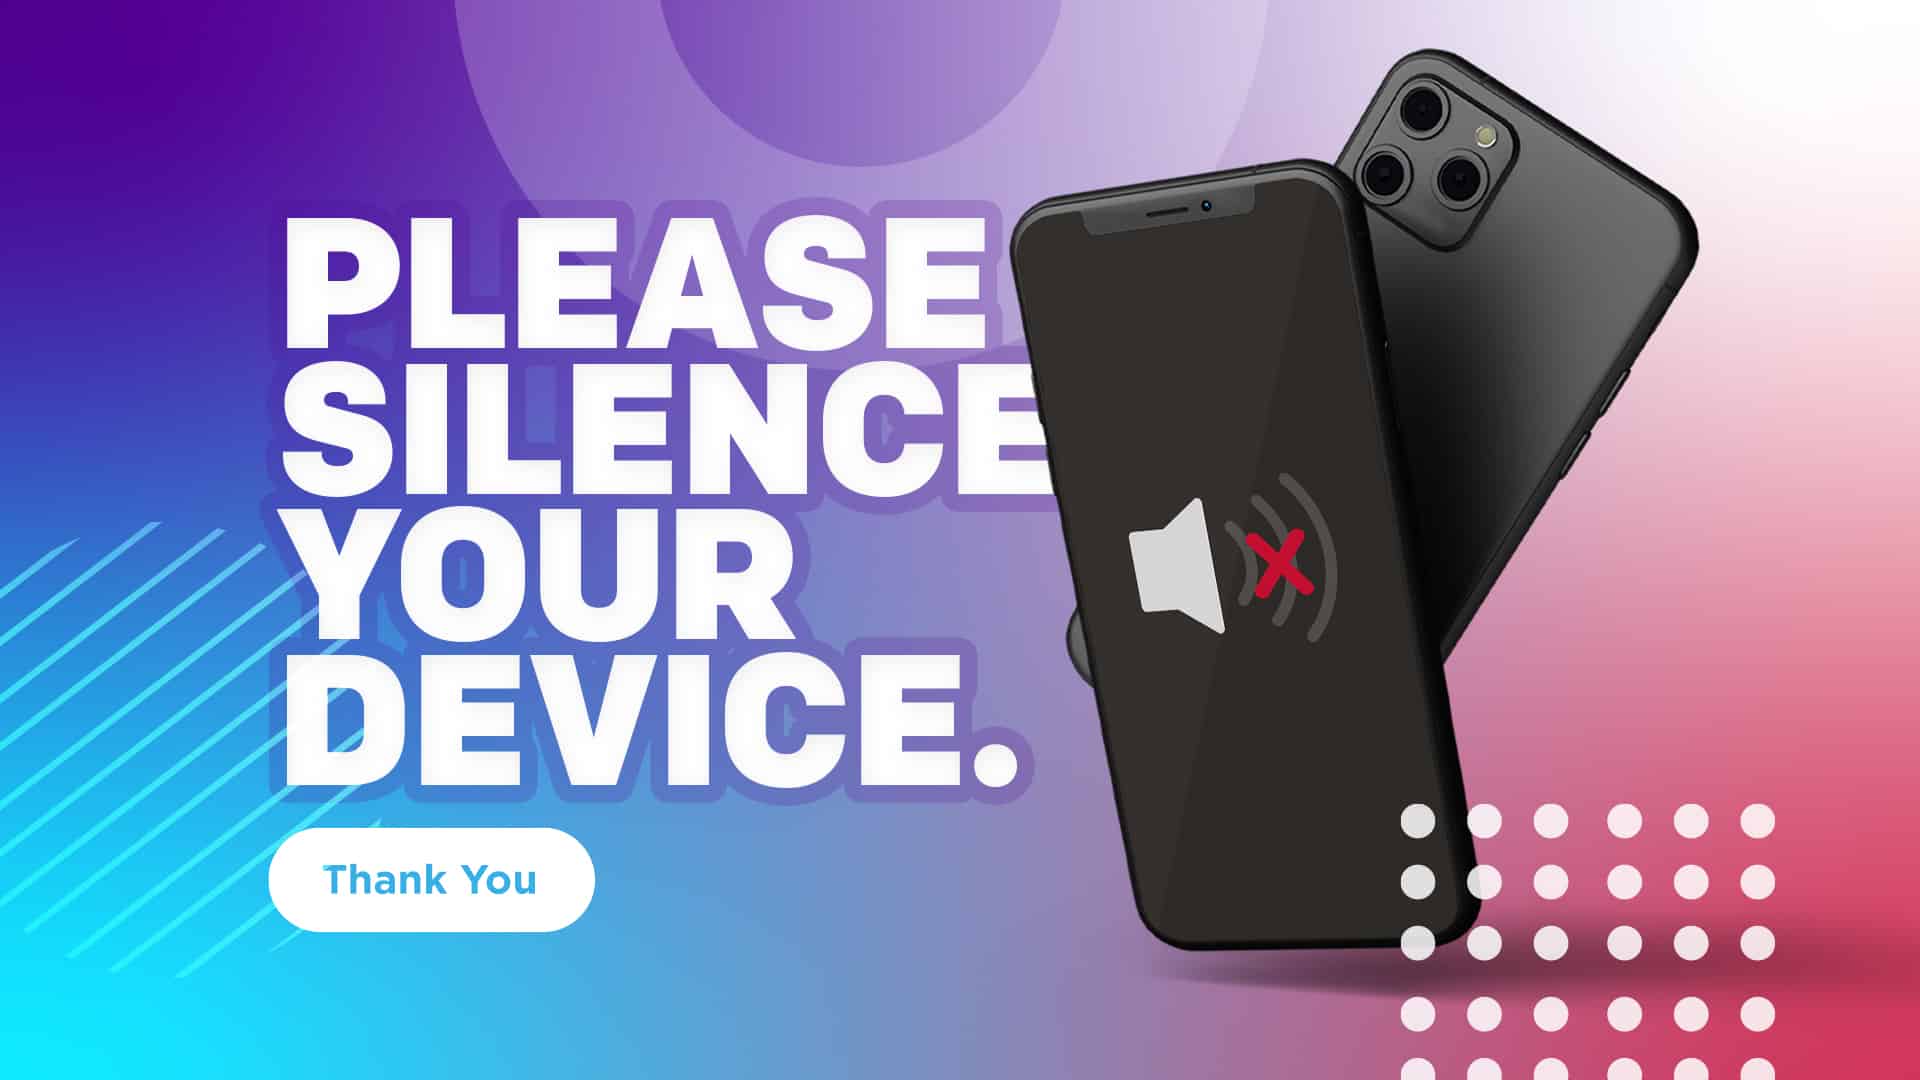 Please silence your devices